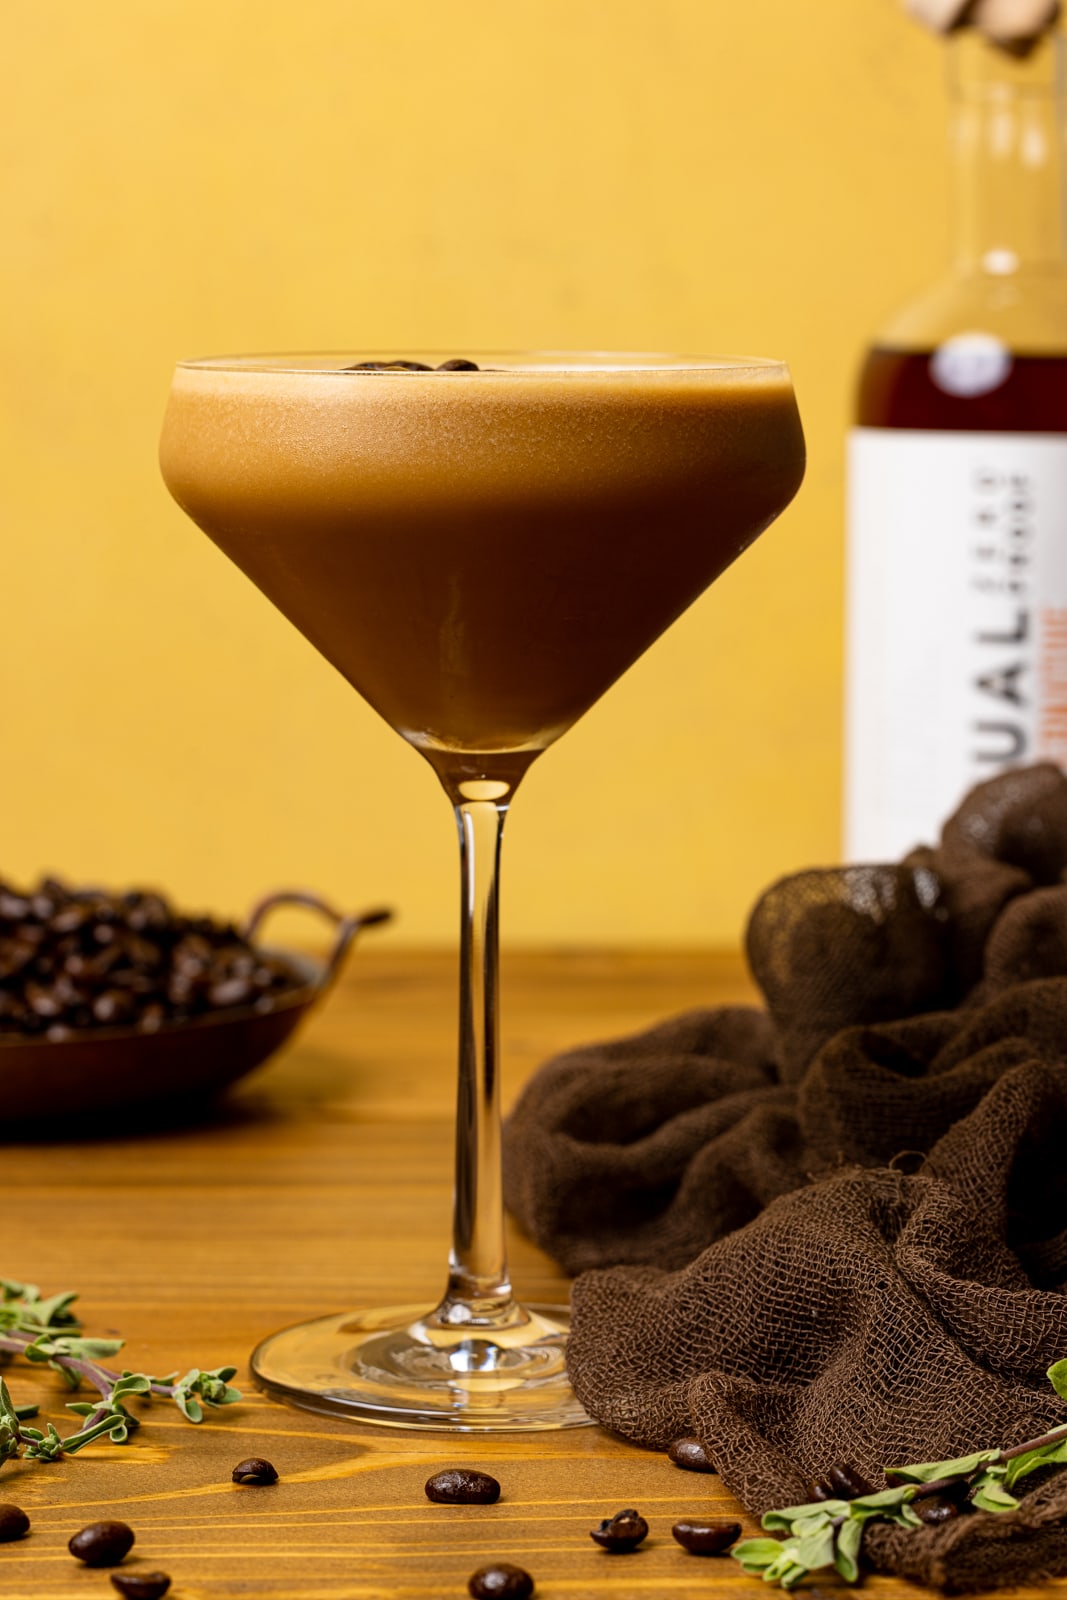 Espresso martini in a glass on a brown wood table with a brown napkin, coffee beans, and Rum alternative.